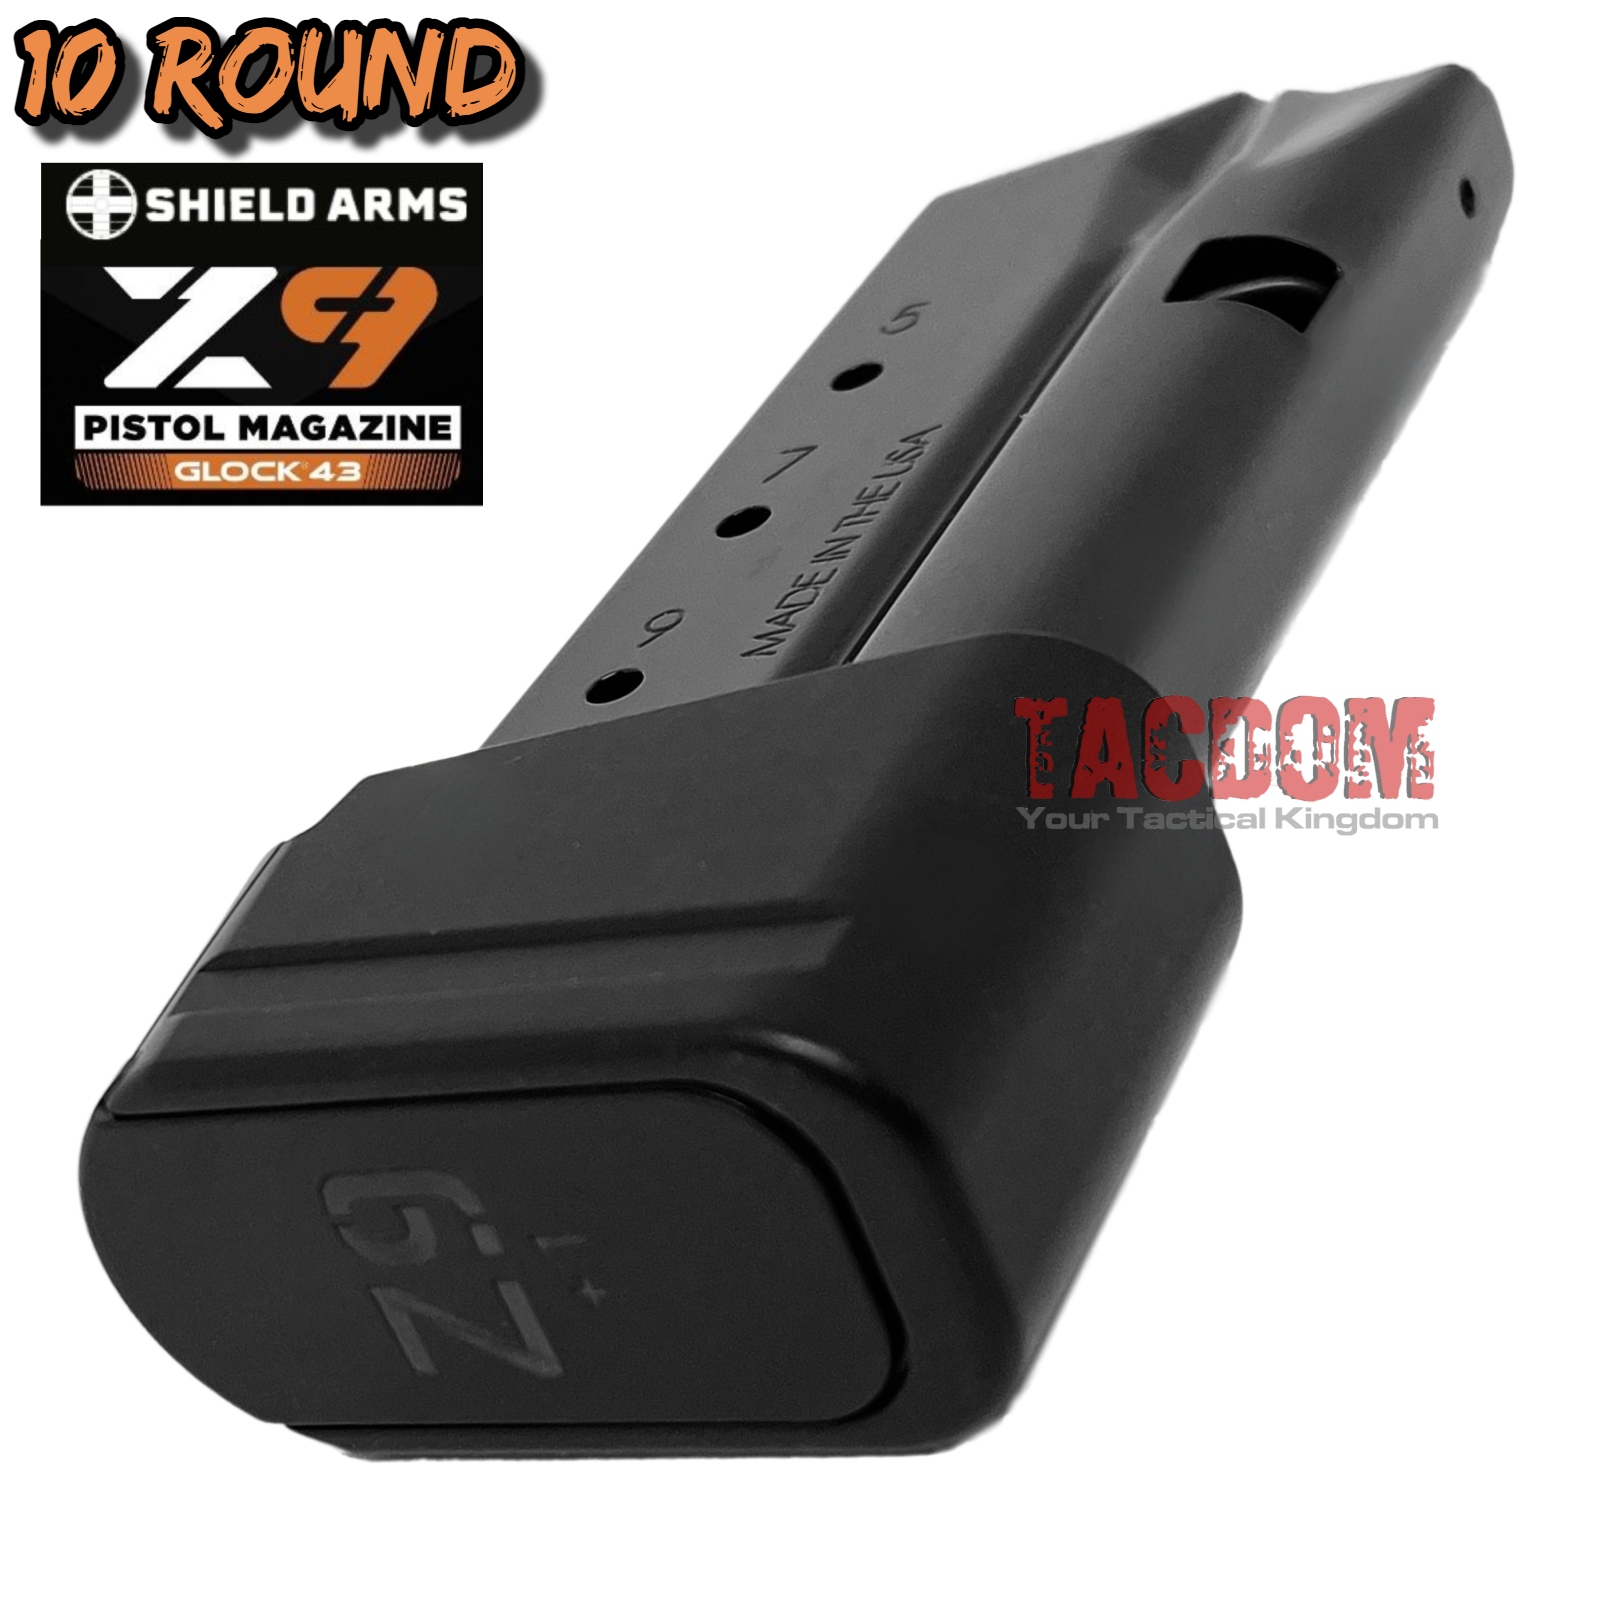 Shield Arms - Glock 26 Pre-Installed Magazine Extension